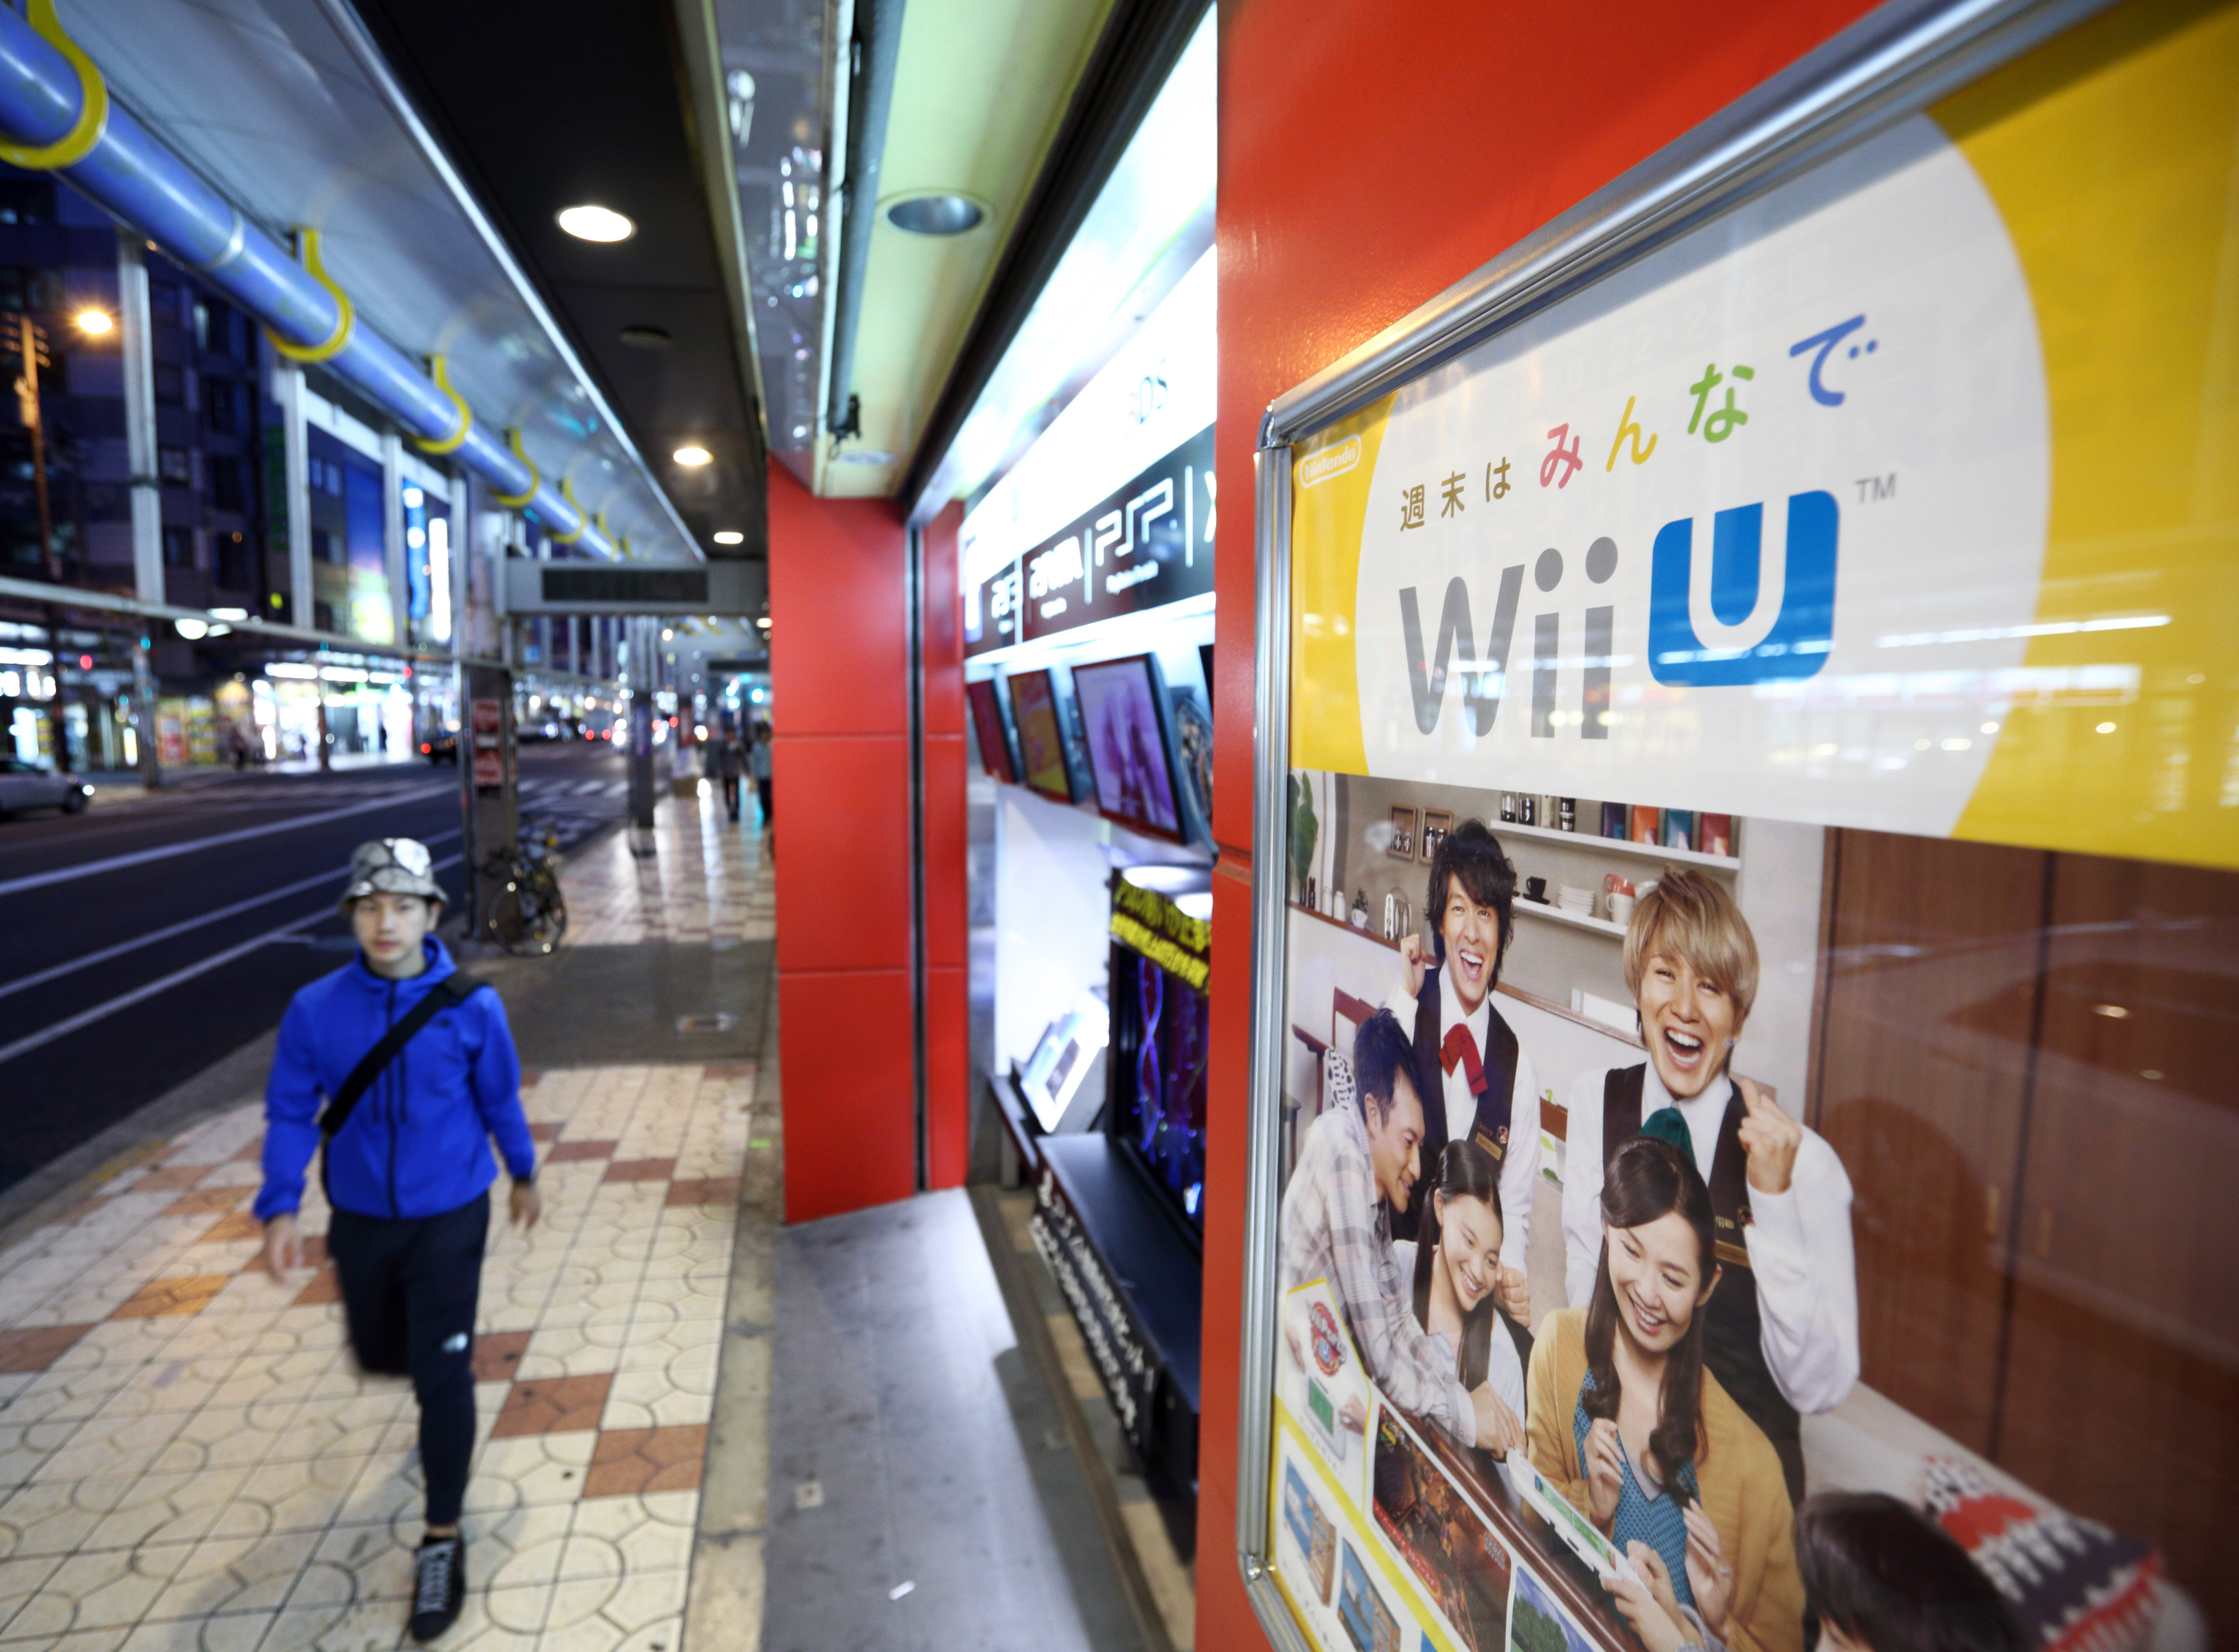 A pedestrian walks past an advertisement for Wii U, Nintendo's gaming console, outside a store in the Japanese city of Osaka on May 2, 2014 (Tomohiro Ohsumi—Bloomberg/Getty Images)